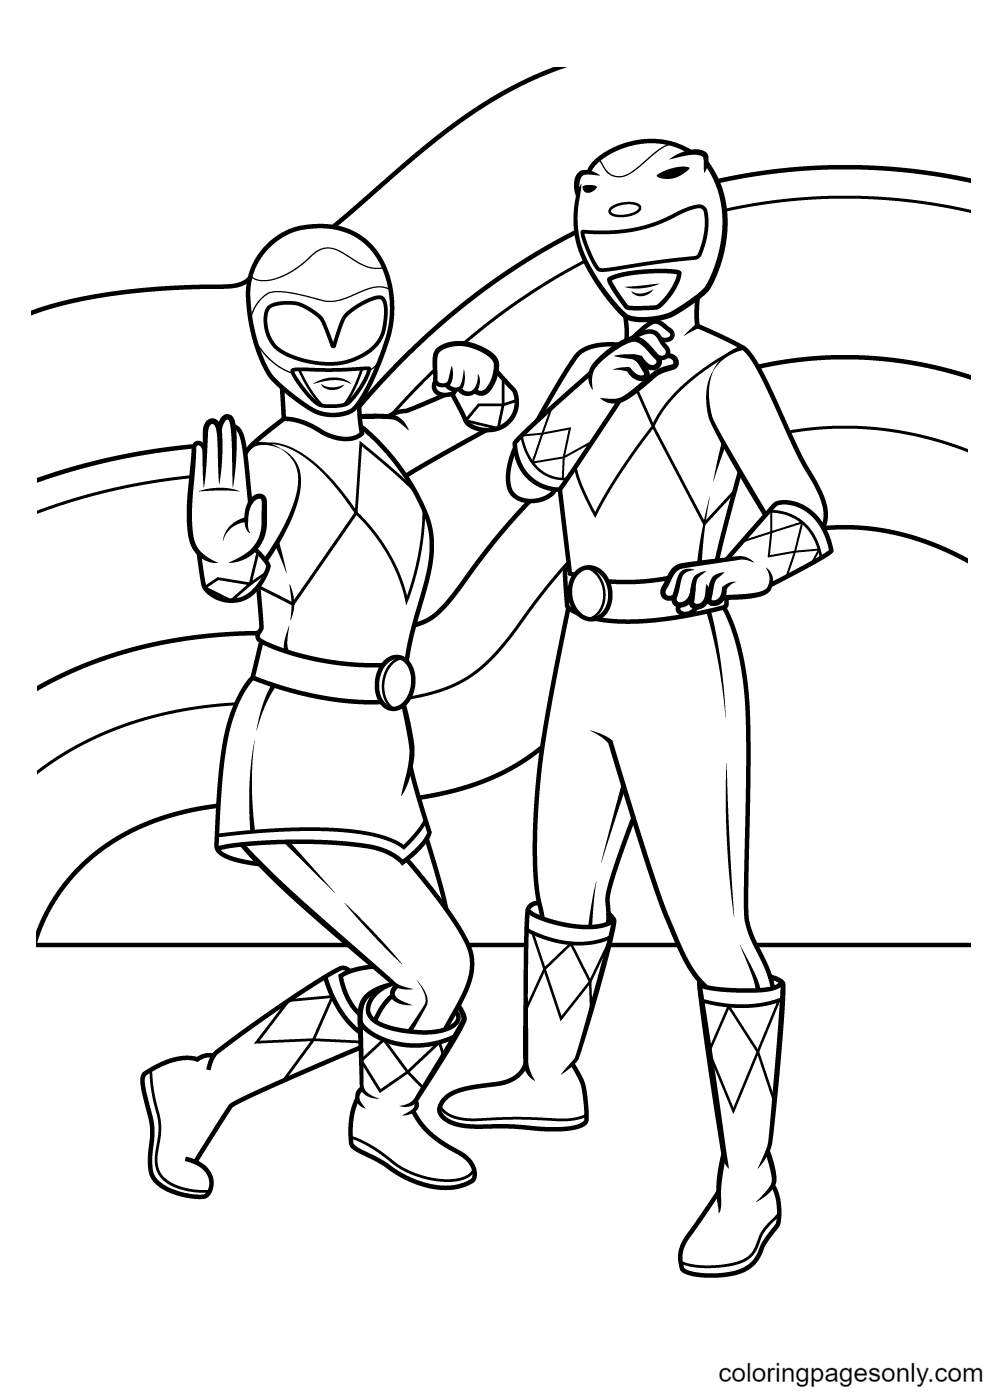 Power Rangers Coloring Pages - Coloring Pages For Kids And Adults